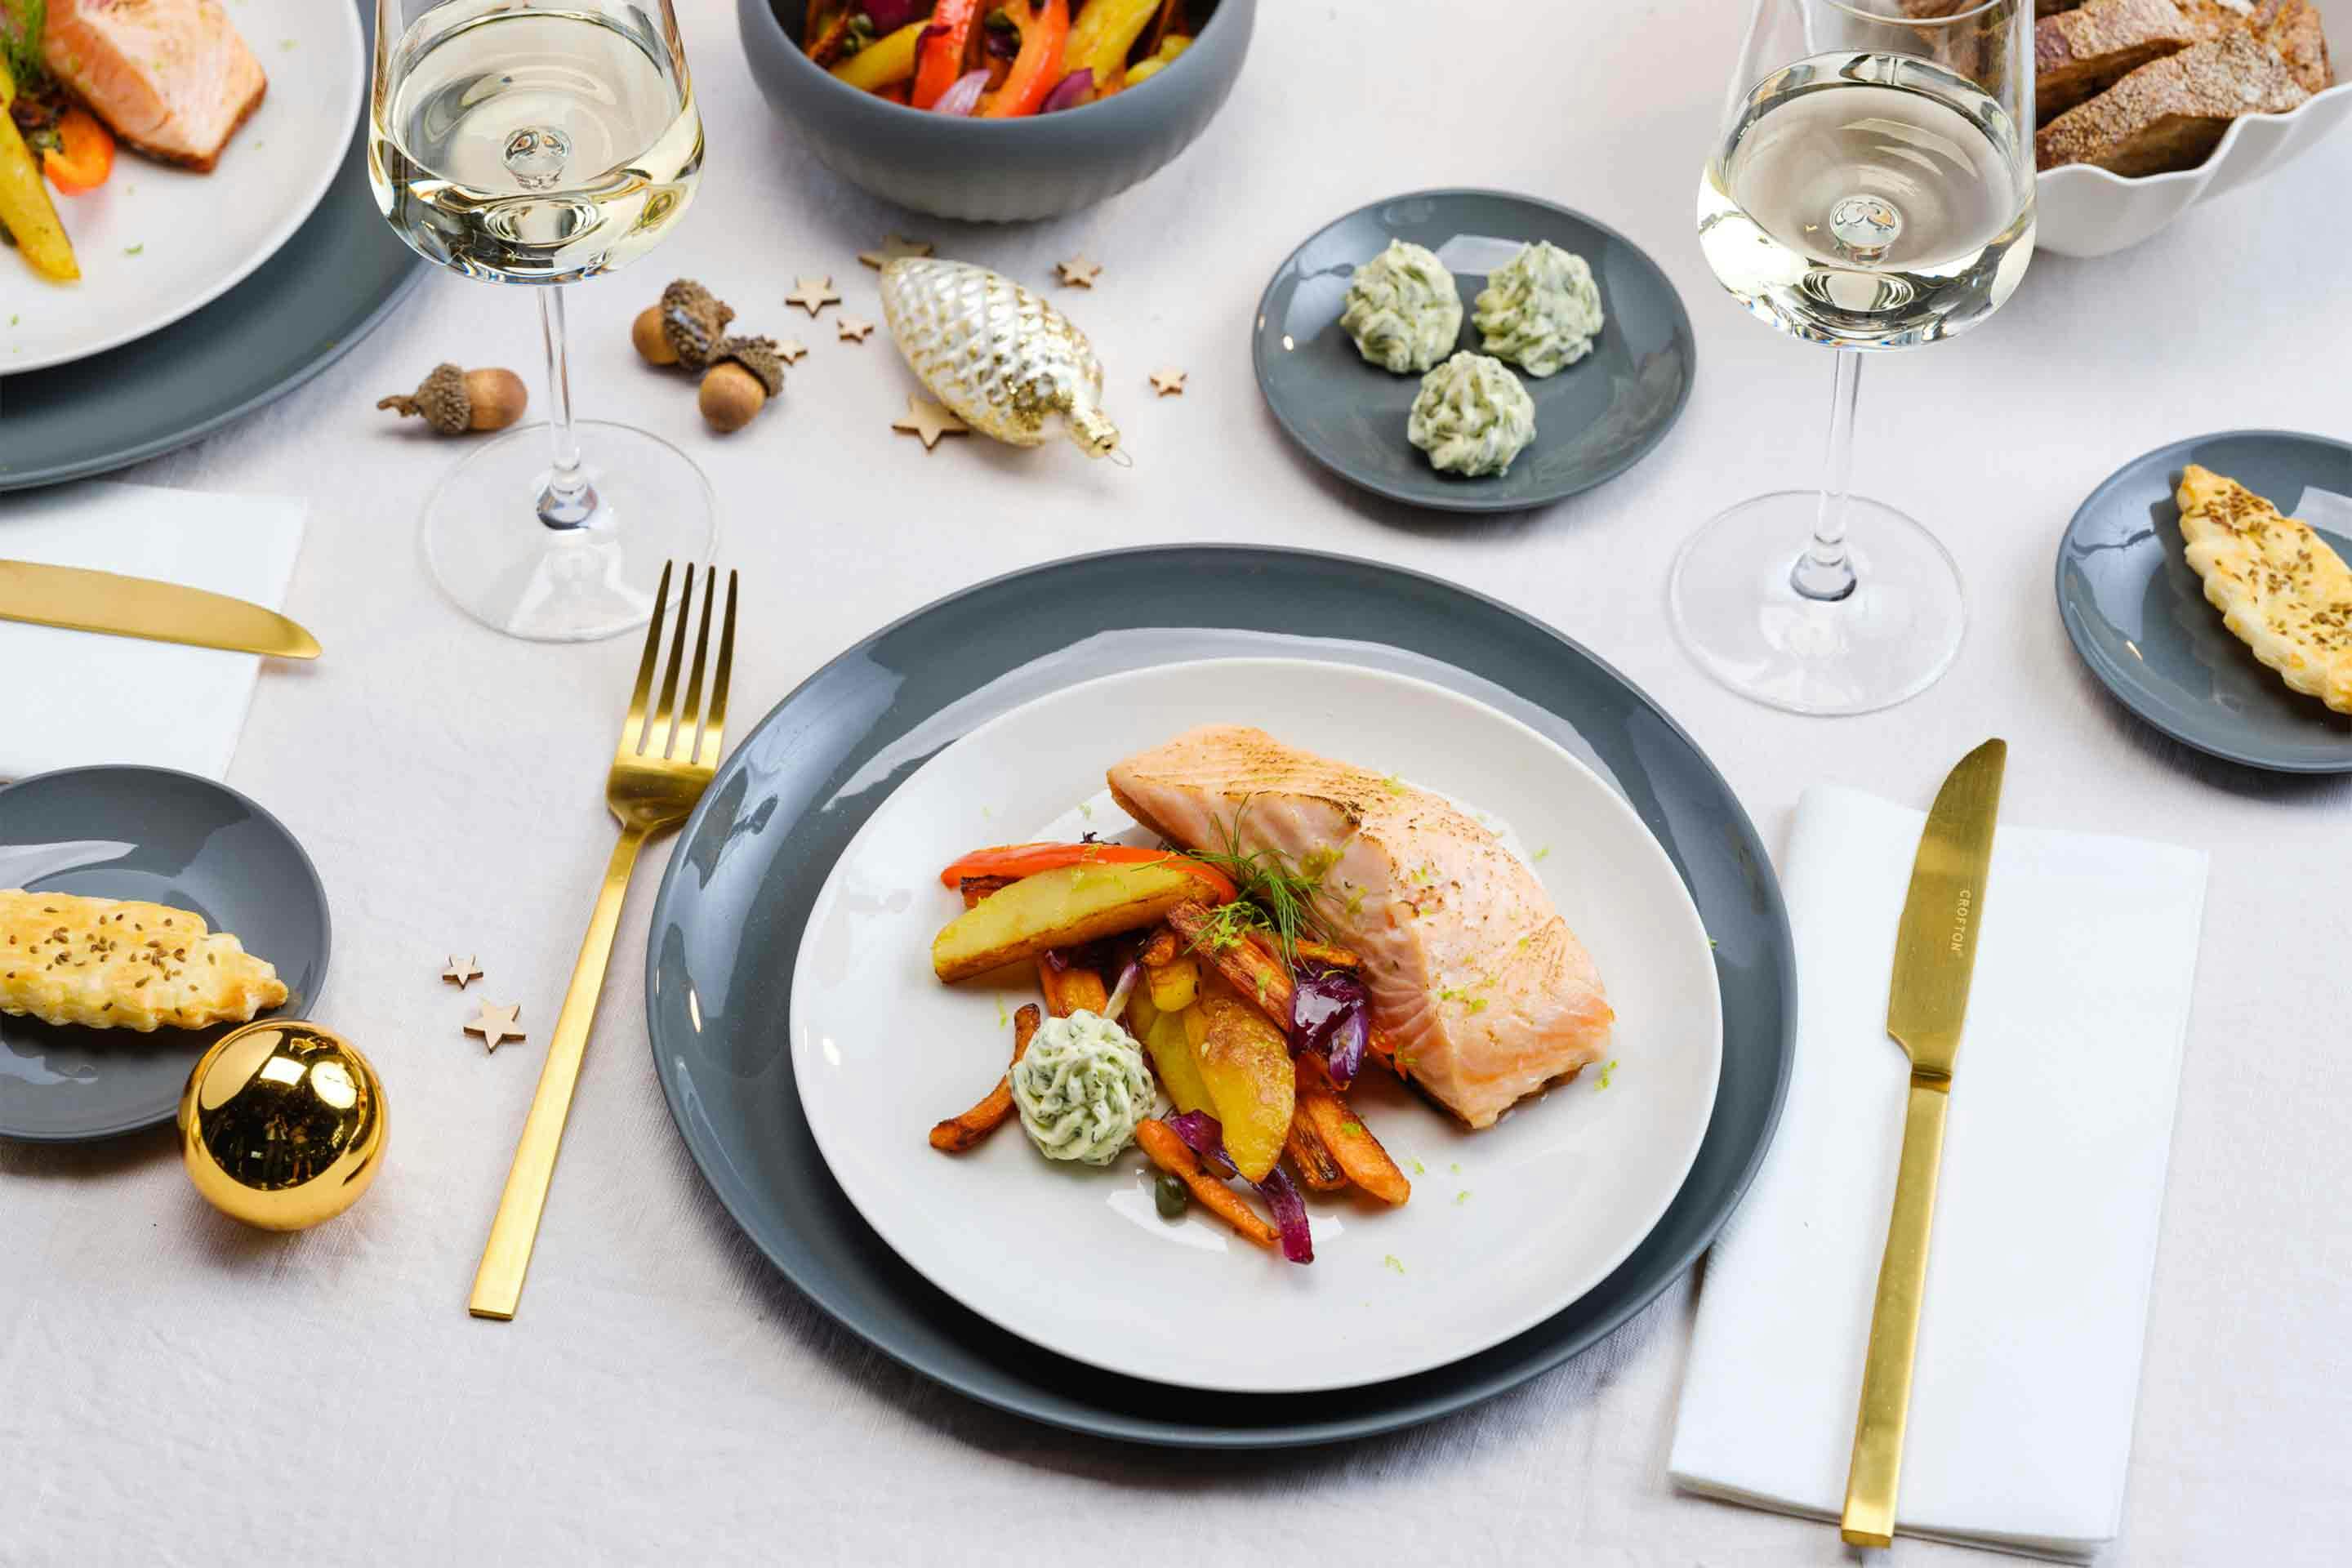 A tender salmon fillet on perfectly oven roasted vegetables.